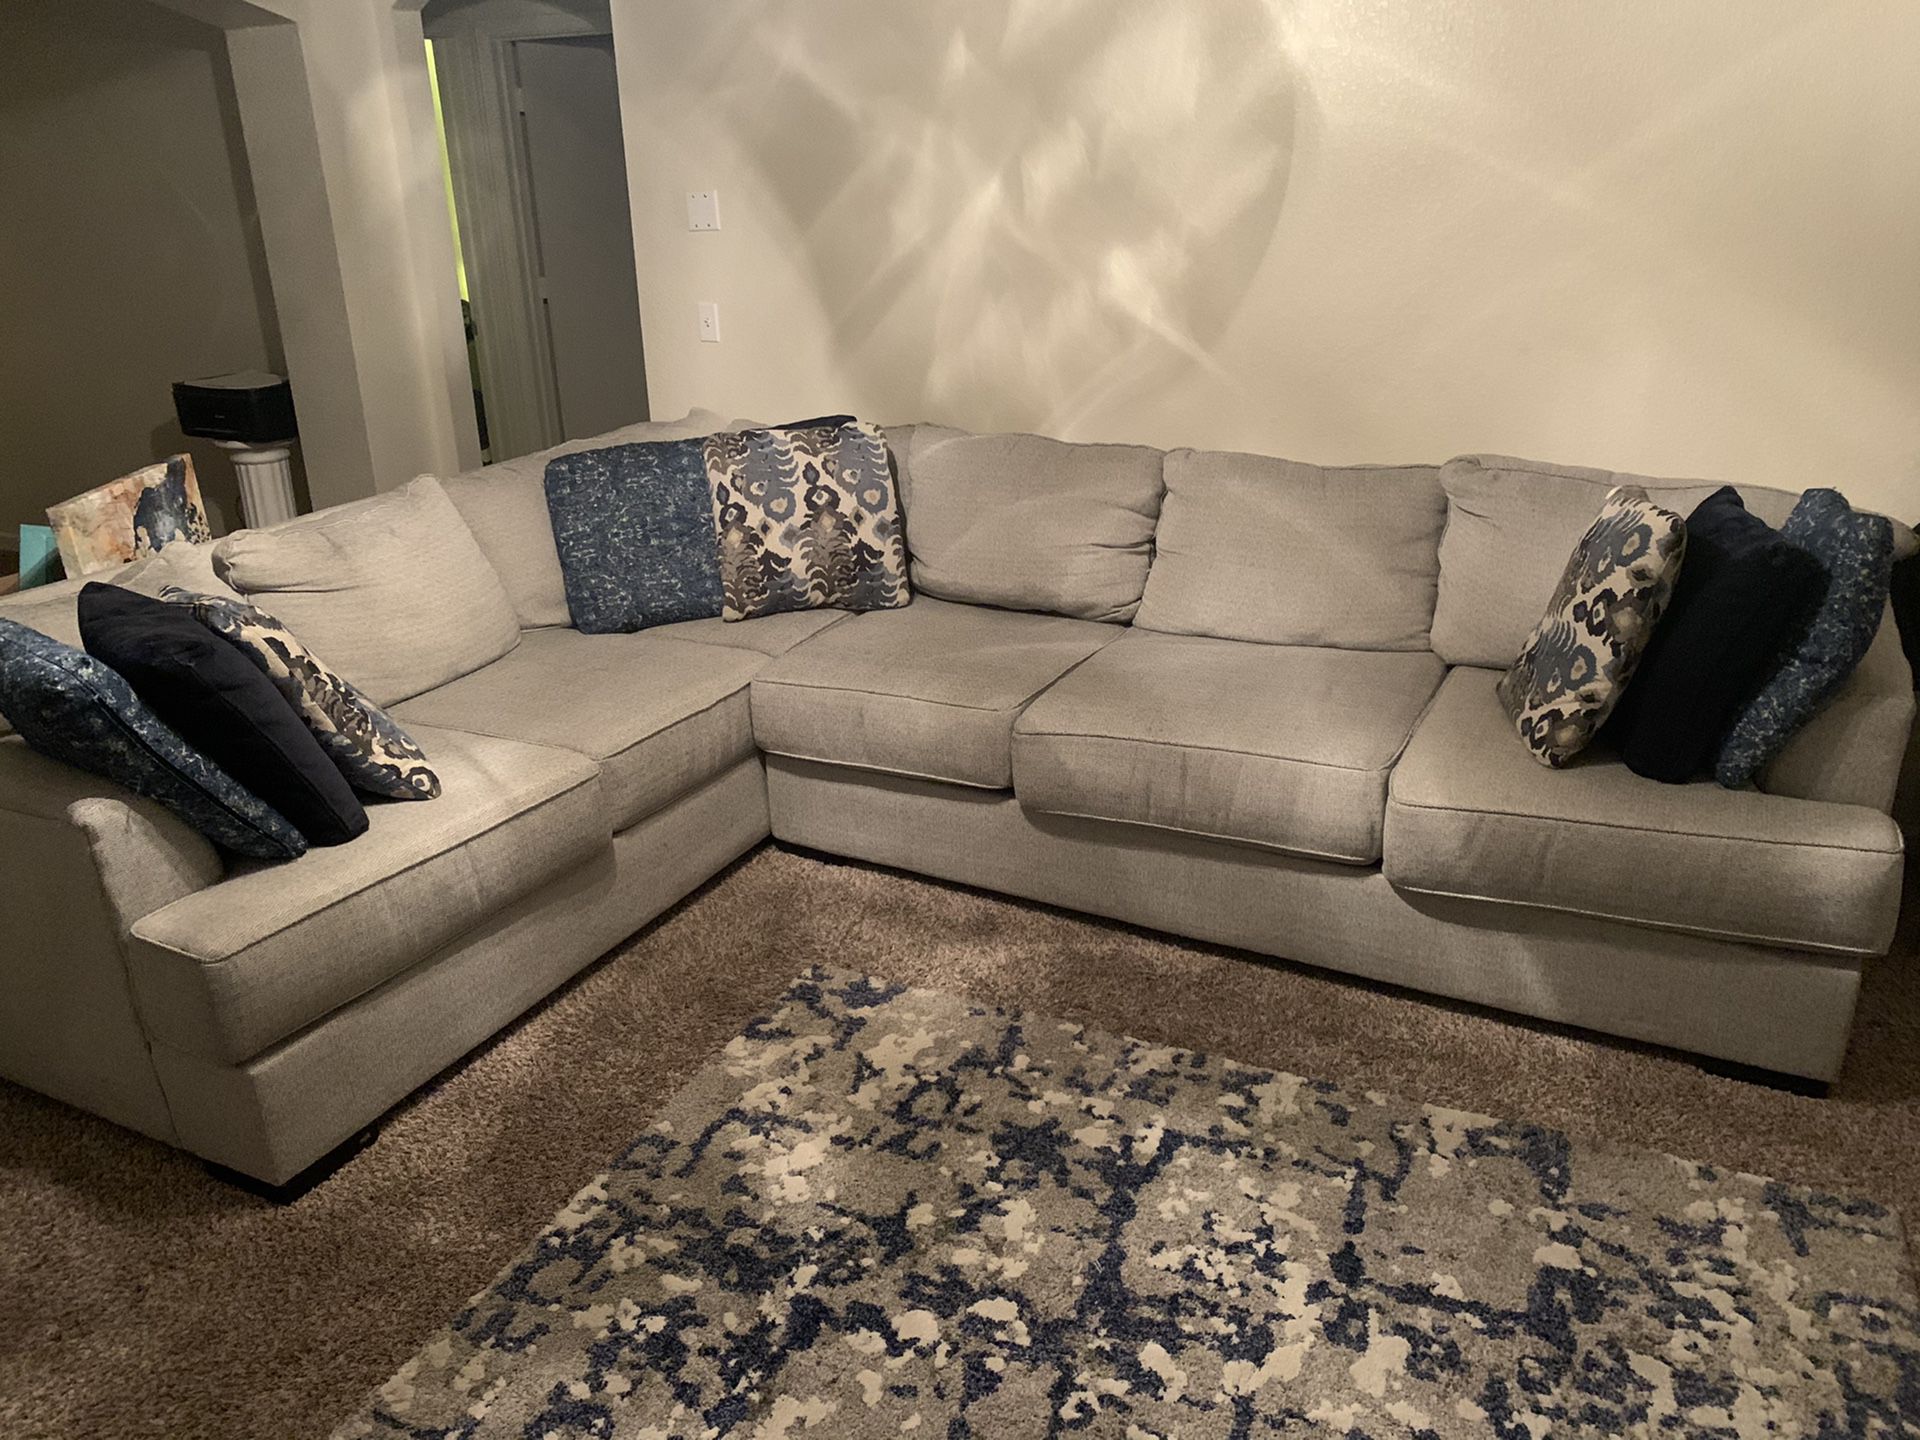 Large sectional in good shape